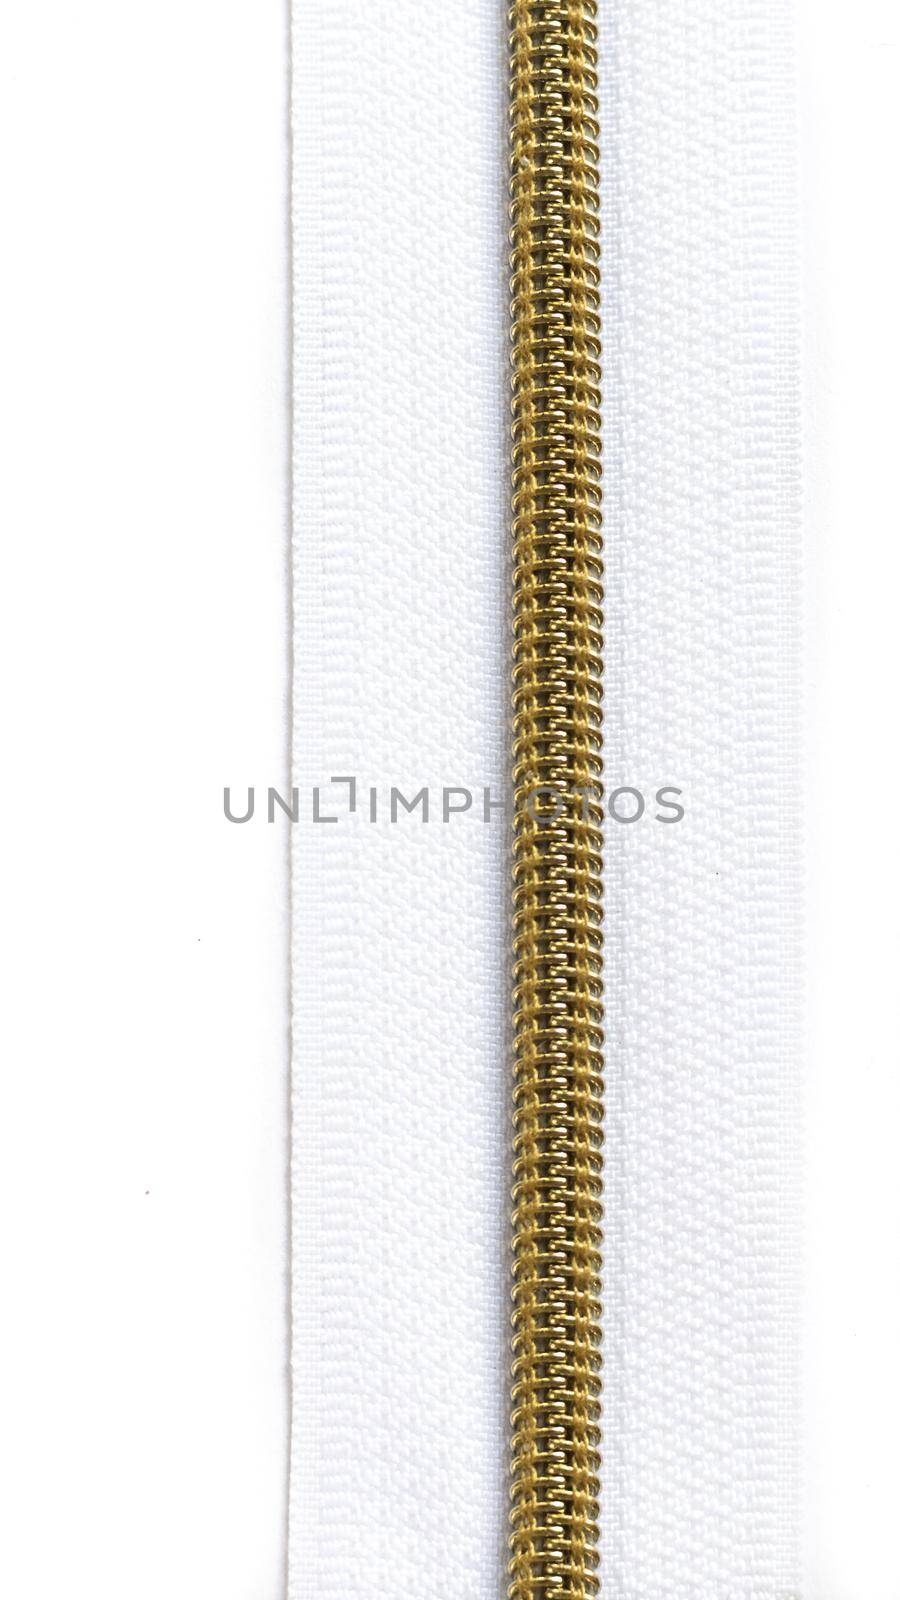 White zipper with gold teeth isolated on white background by ingalinder